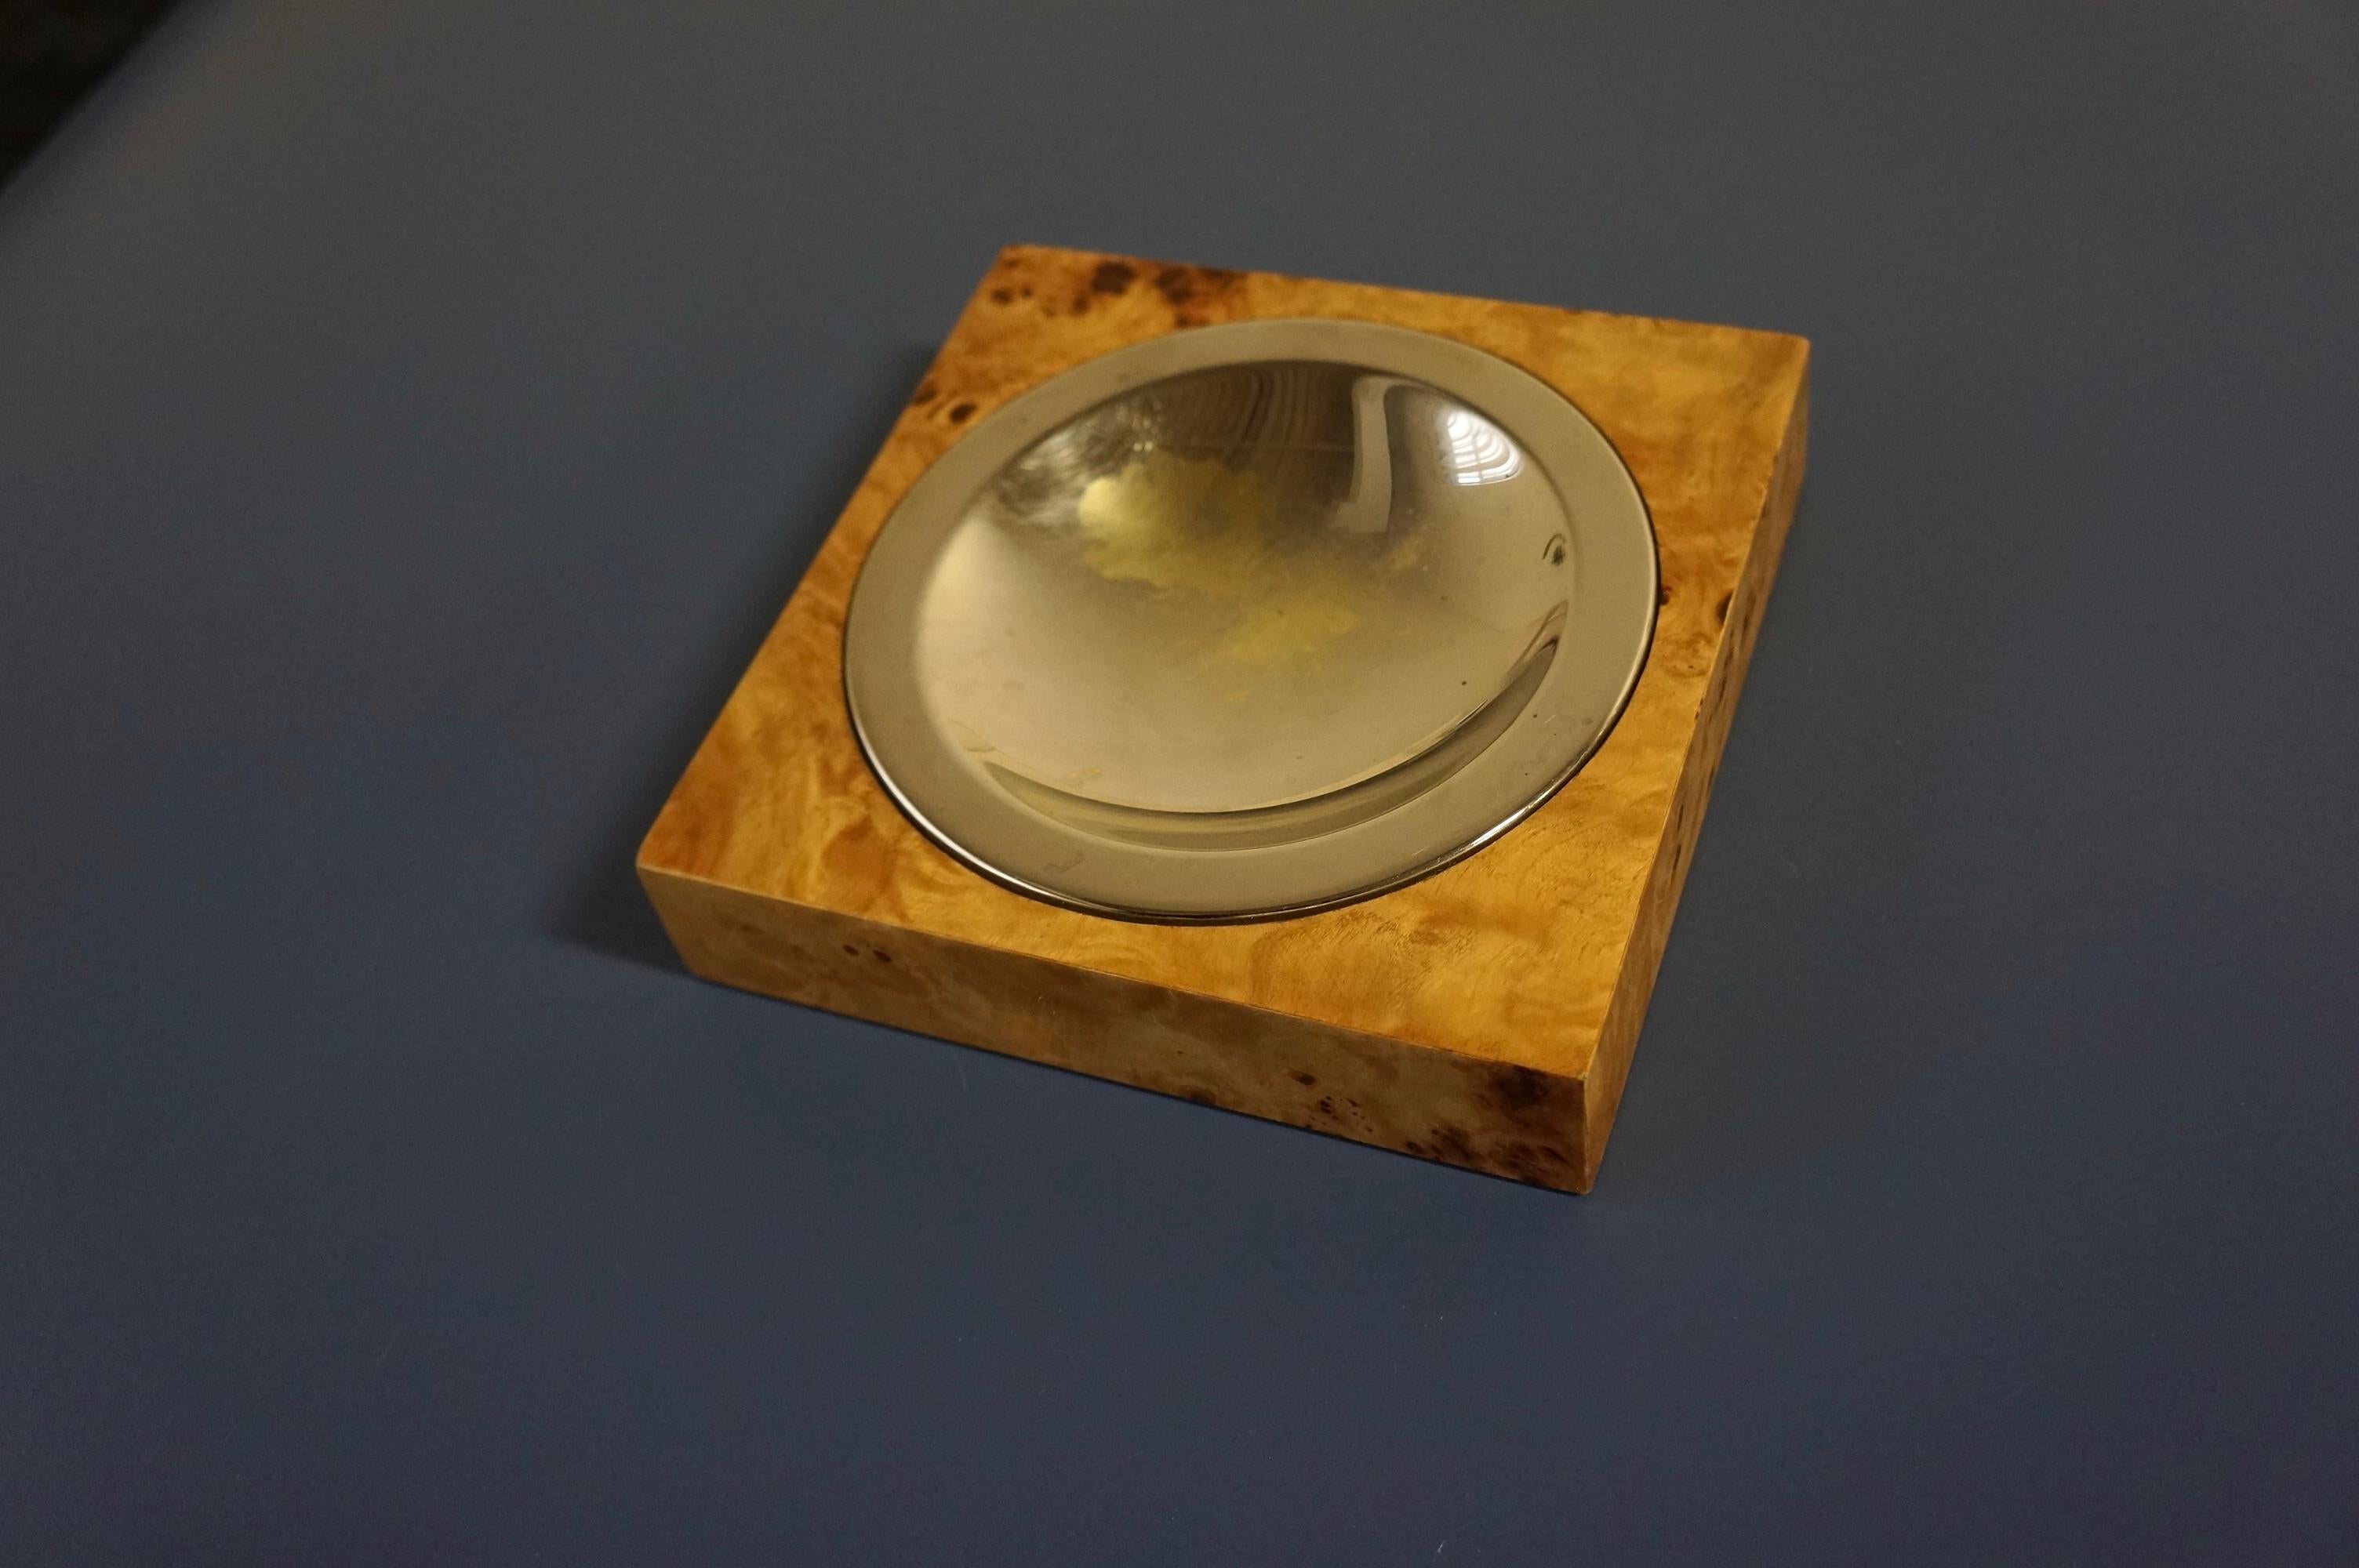 A burl wood and Chrome ashtray dish designed by Tommaso Barbi in the 1970s. This original design by Barbi was made in Italy. While it was designed to be an ashtray, it can be used as a dish or trinket. The rounded chrome of the piece sits perfectly